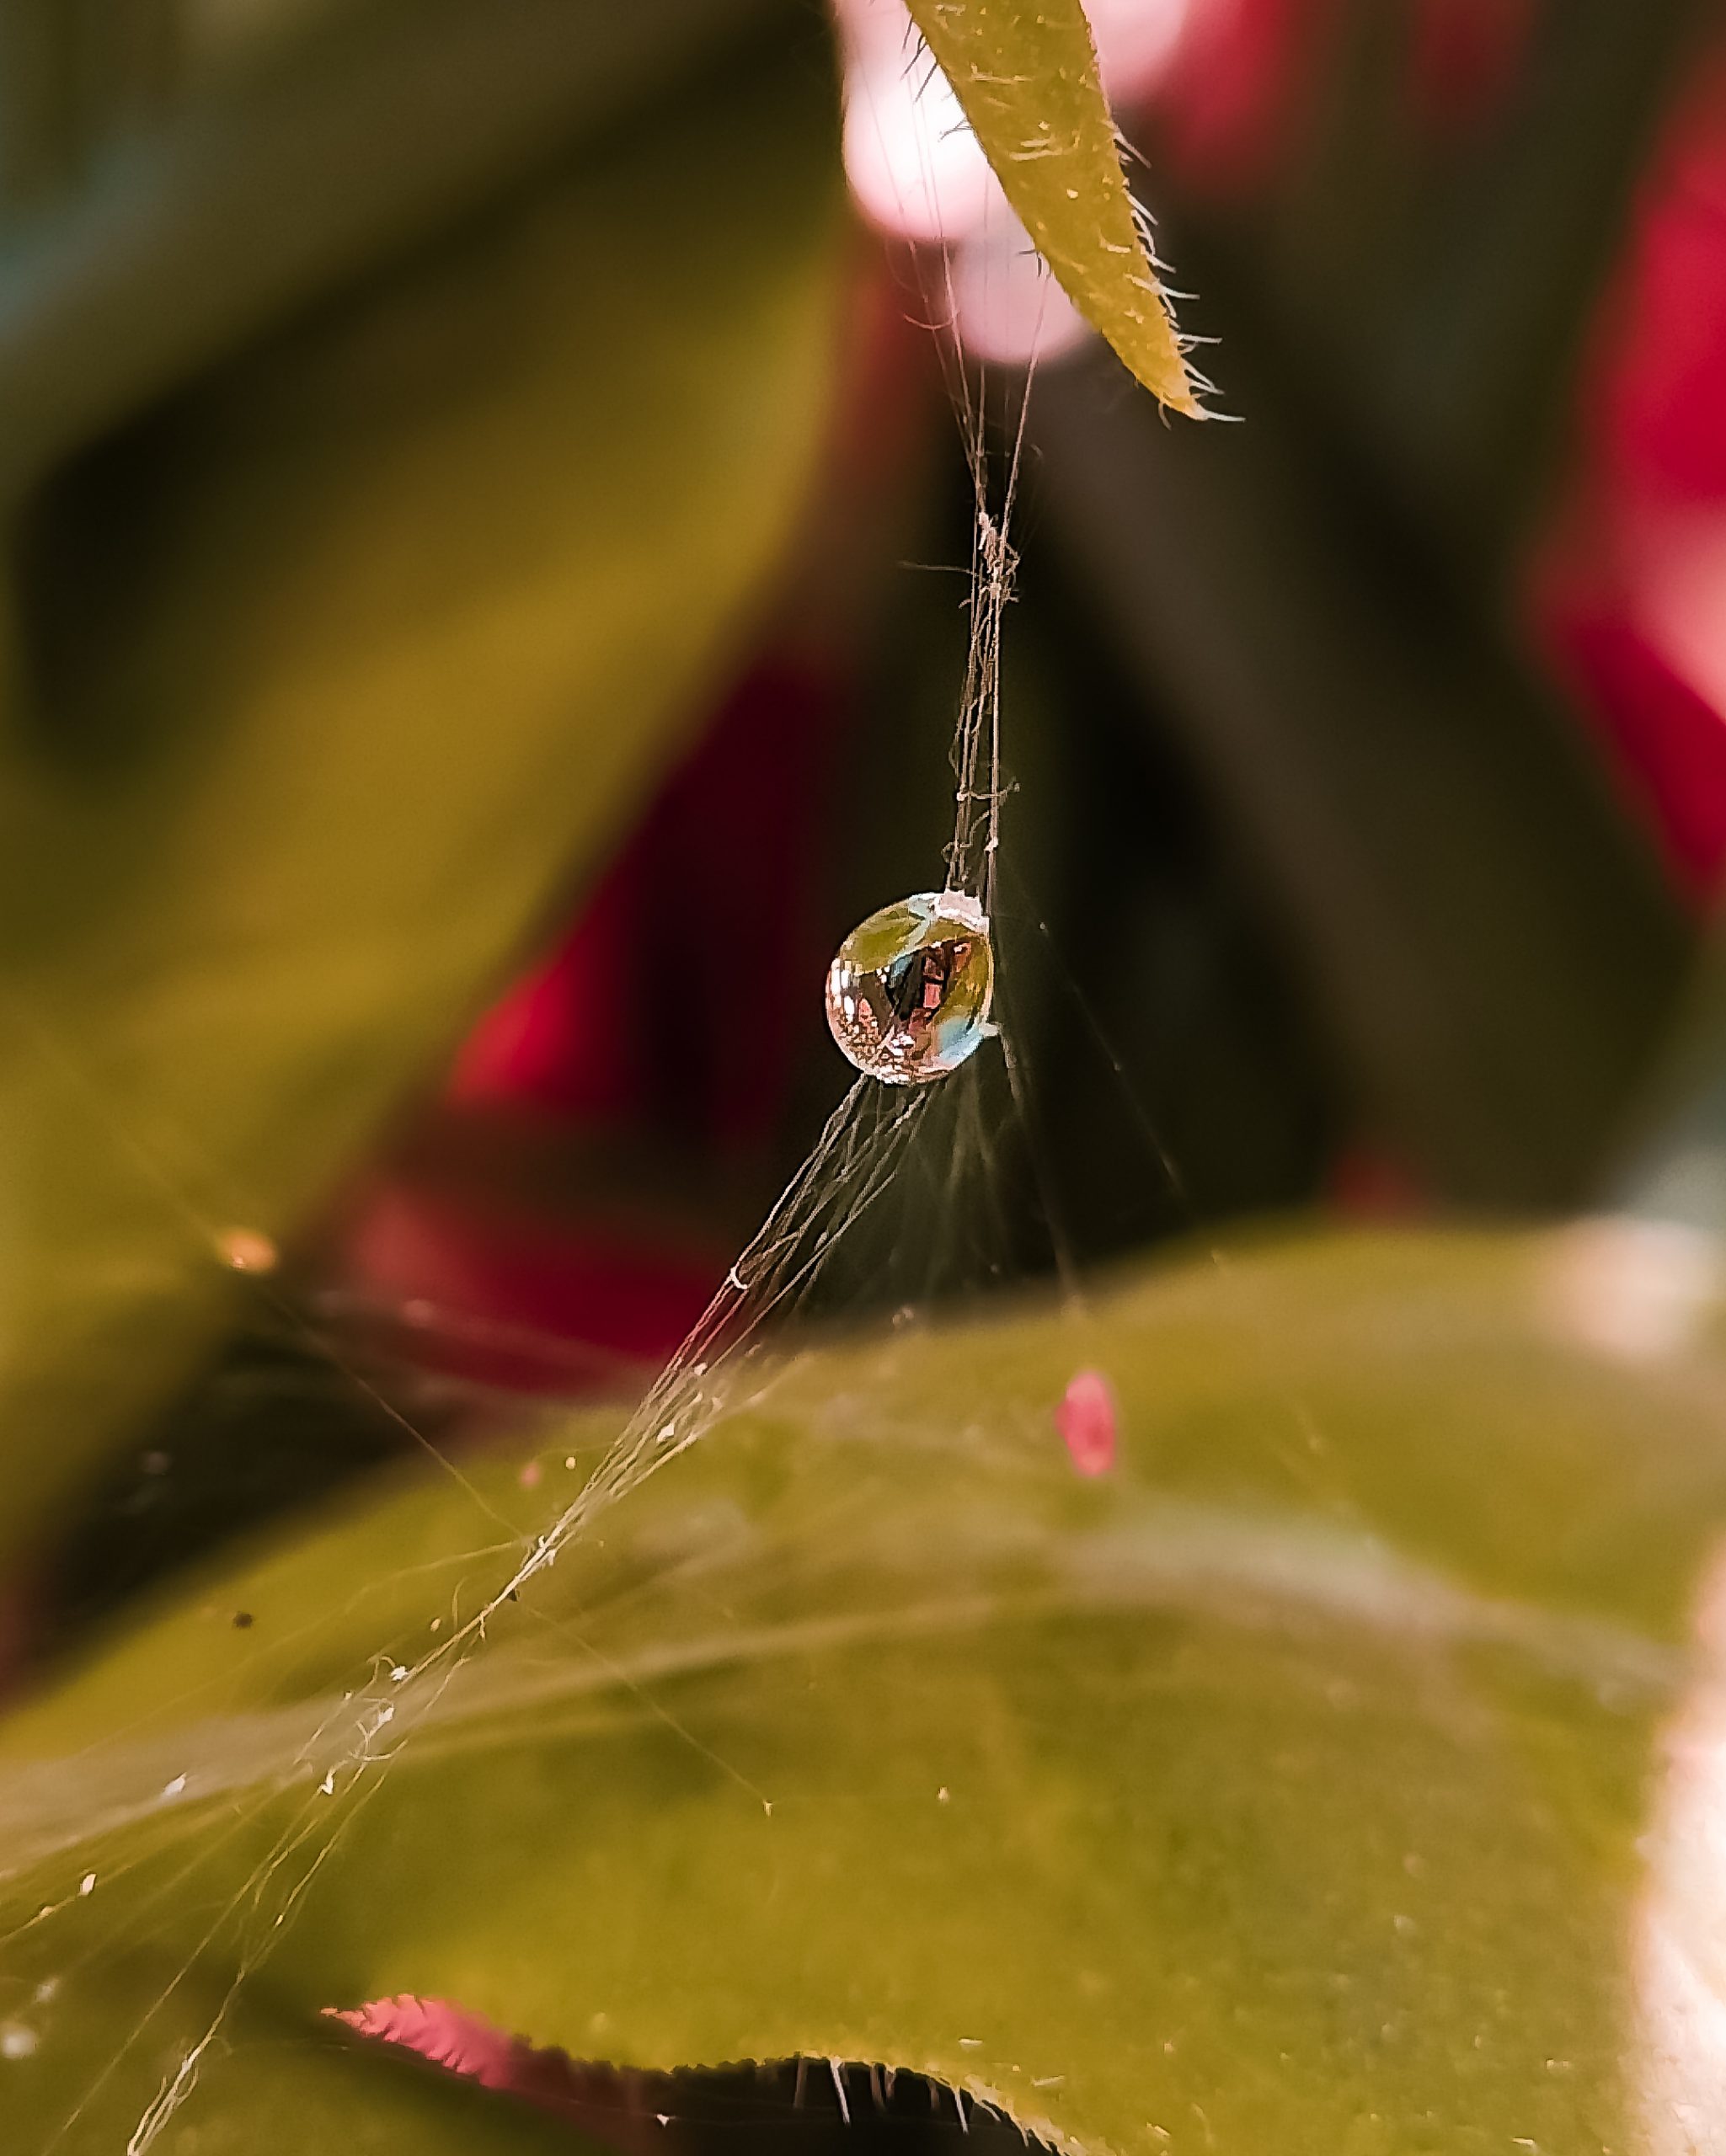 Water drop on spider web